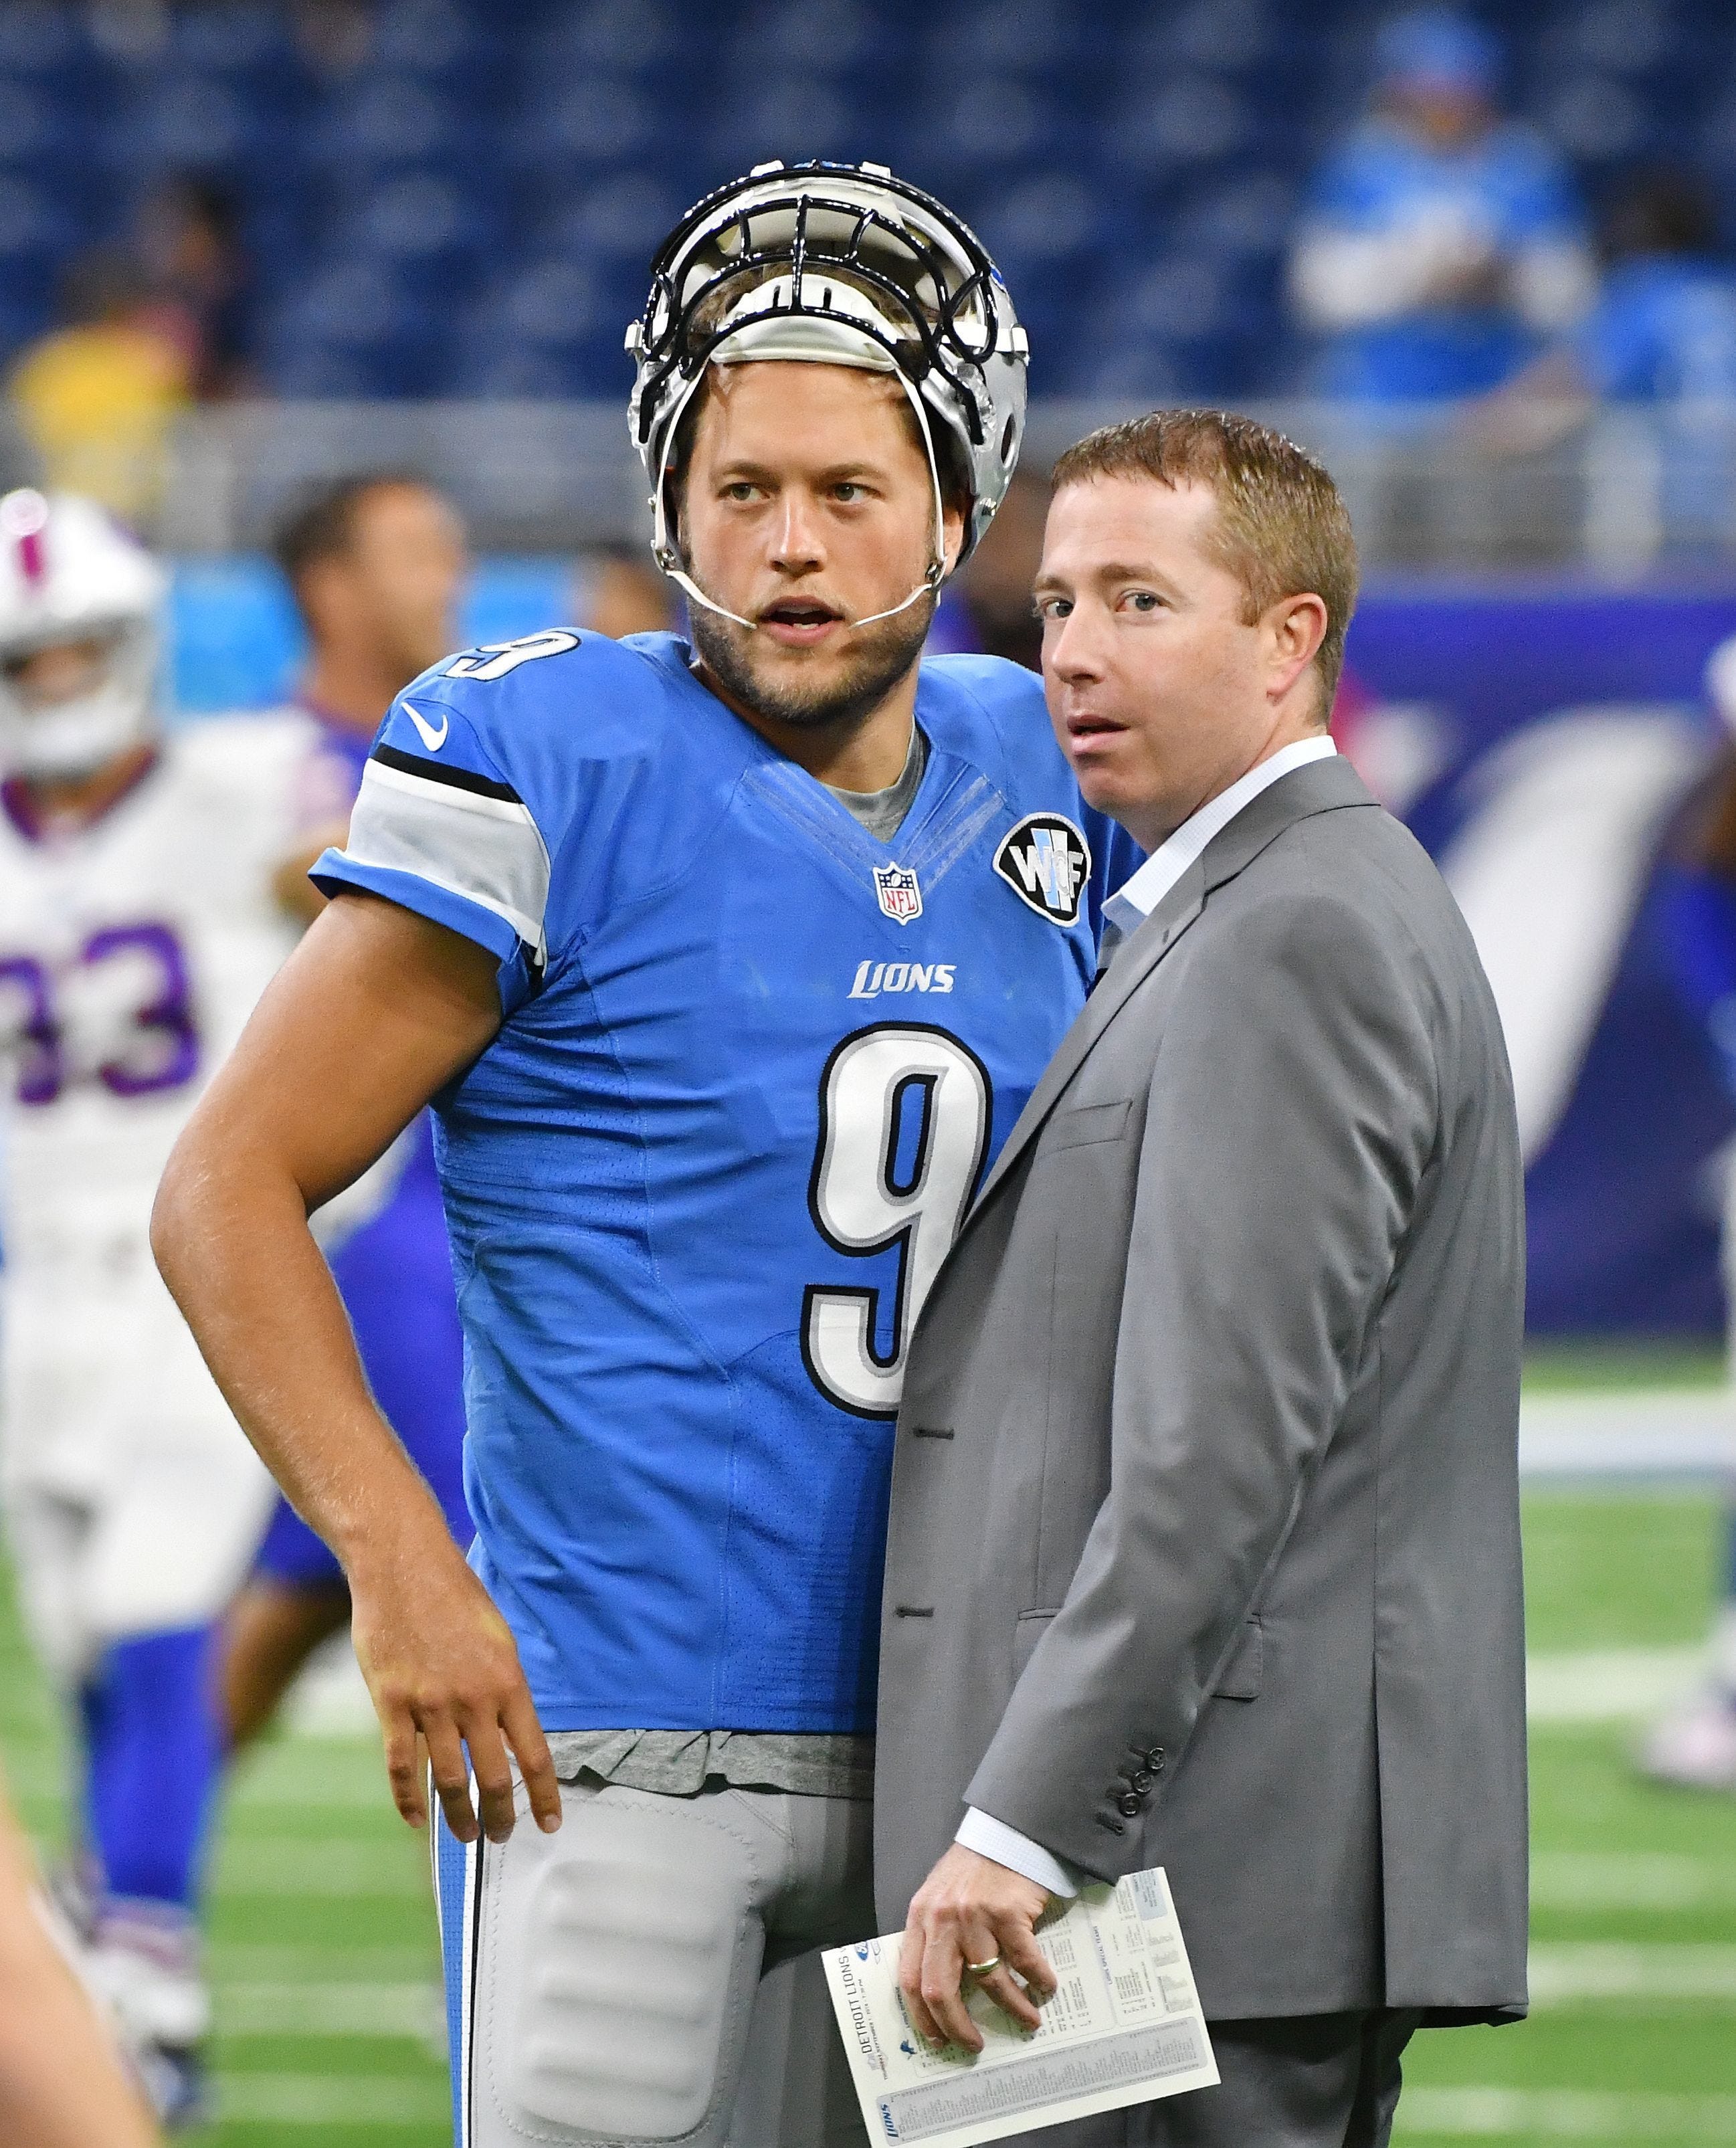 General manager Bob Quinn says drafting a quarterback in the first round is not out of the question, though he and coach Matt Patricia have faith in starter Matthew Stafford.